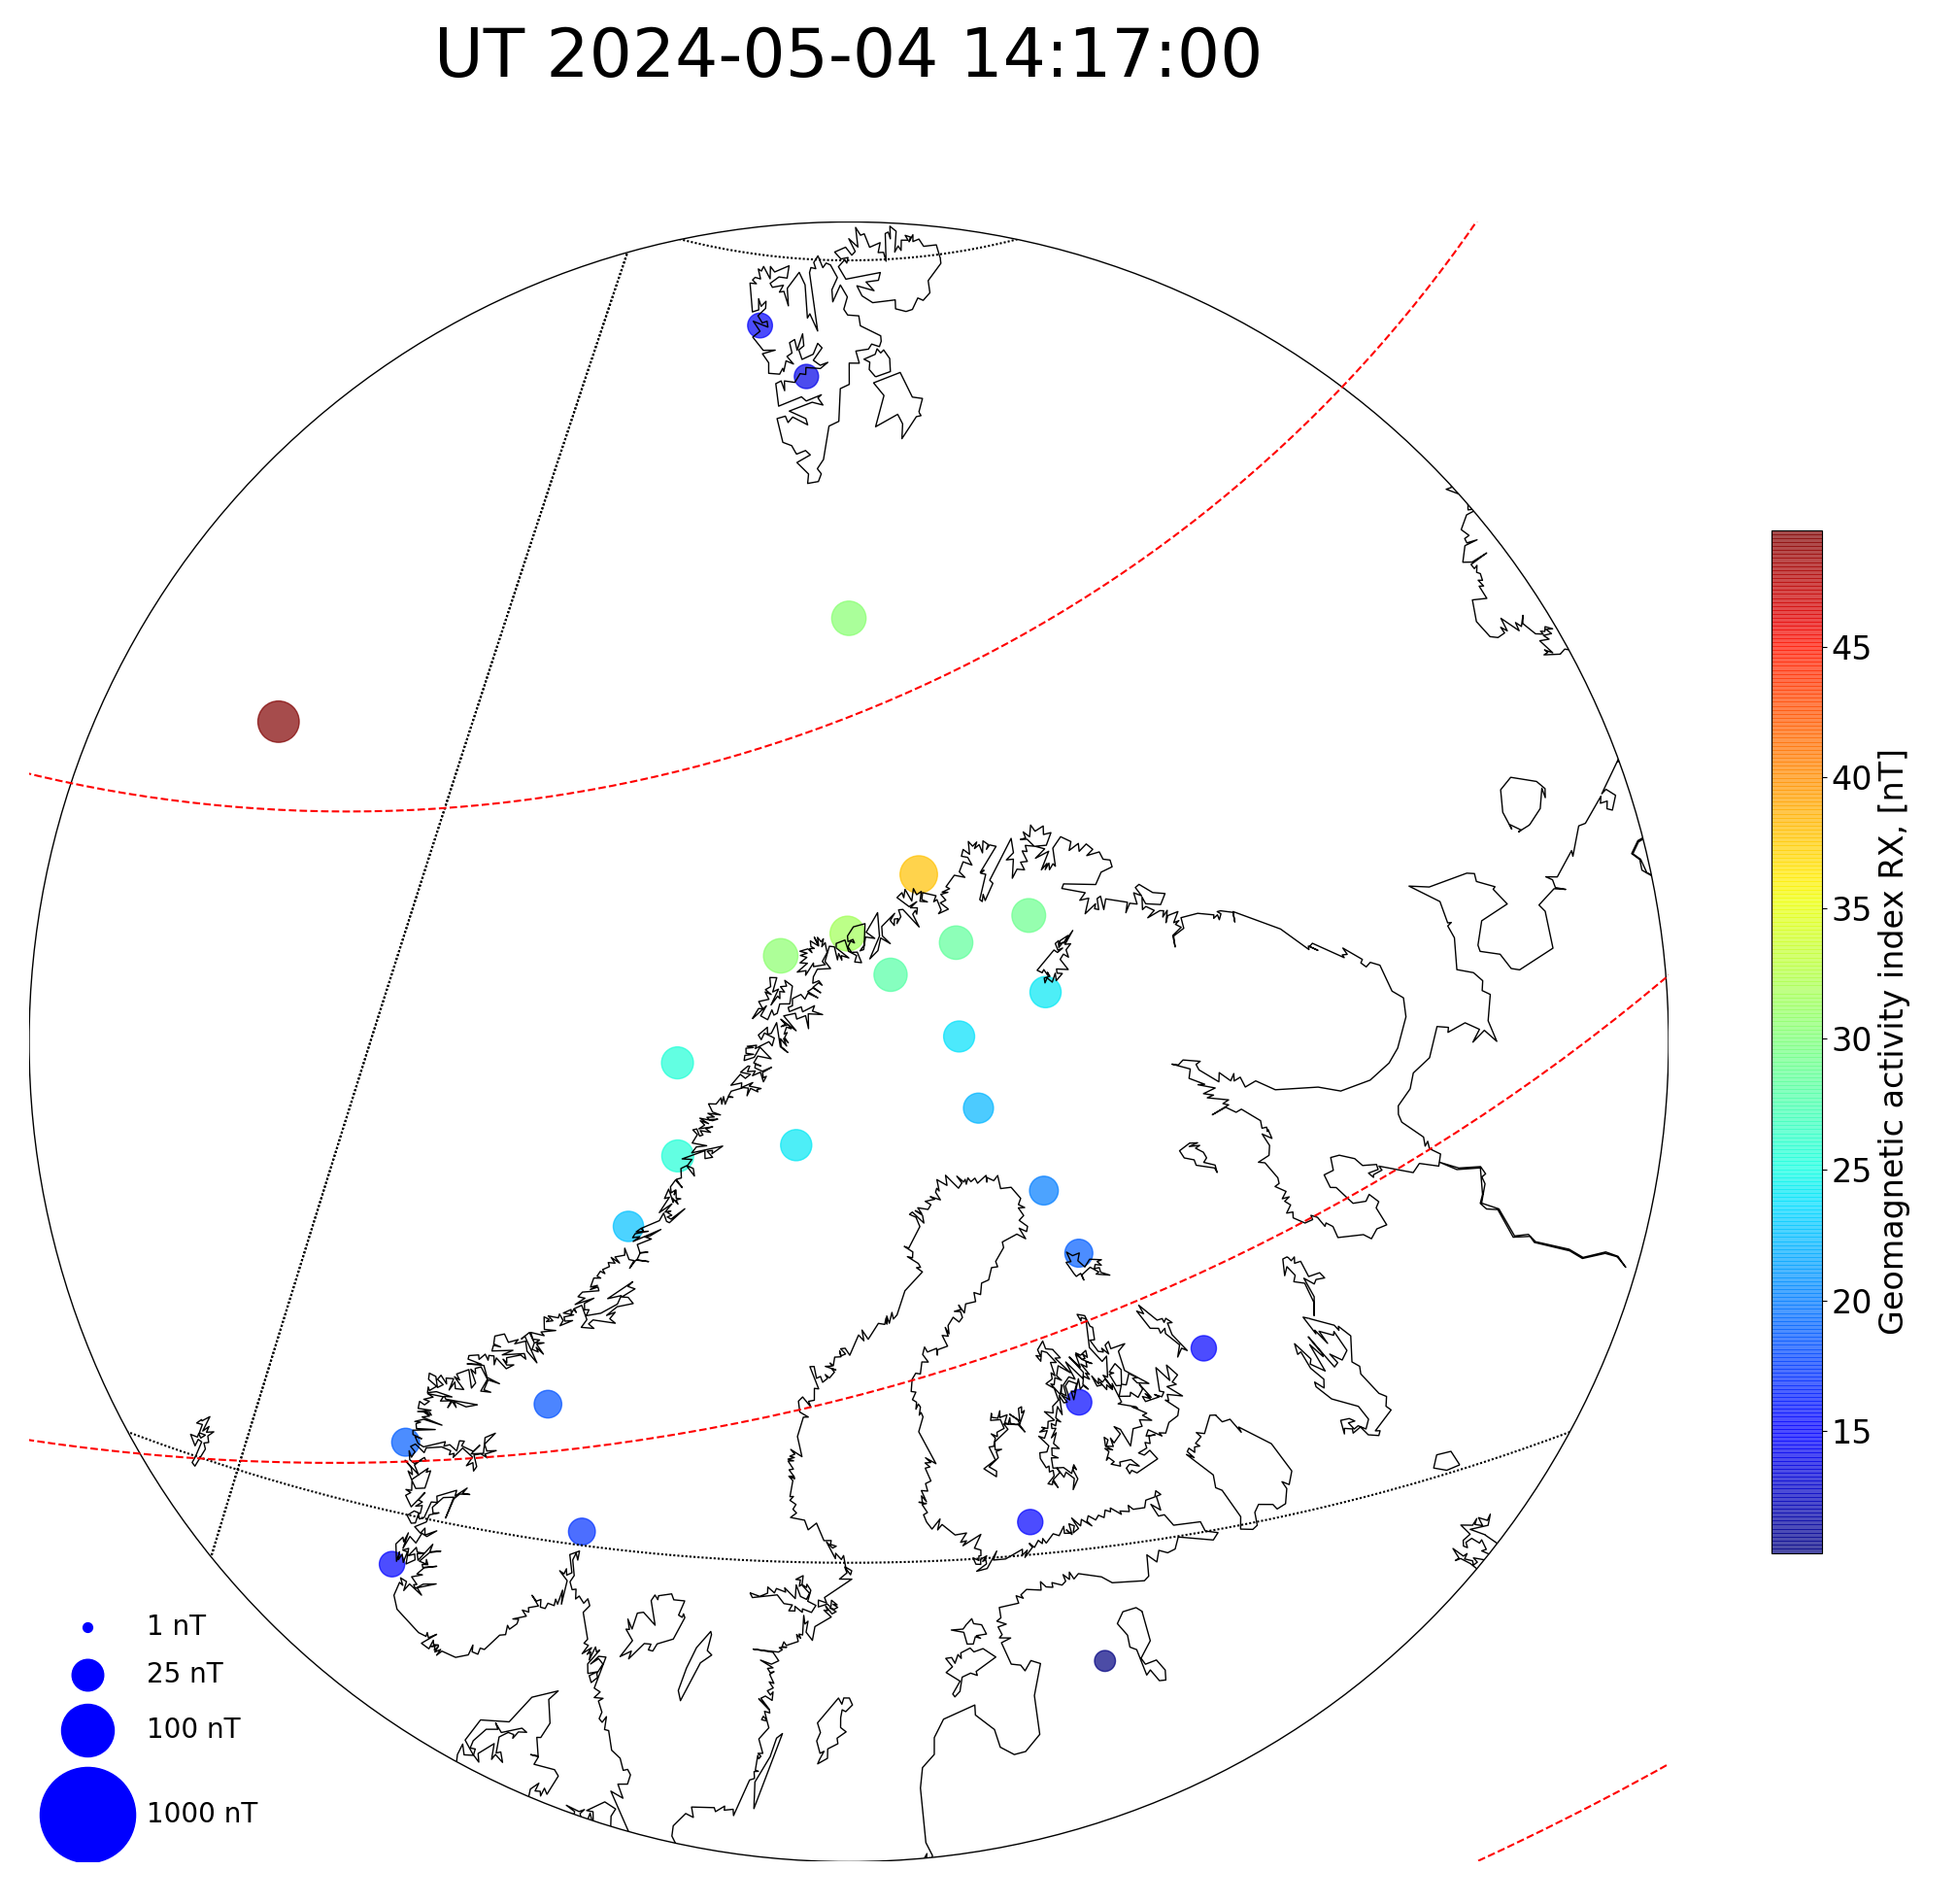 Real-time geomagnetic activity